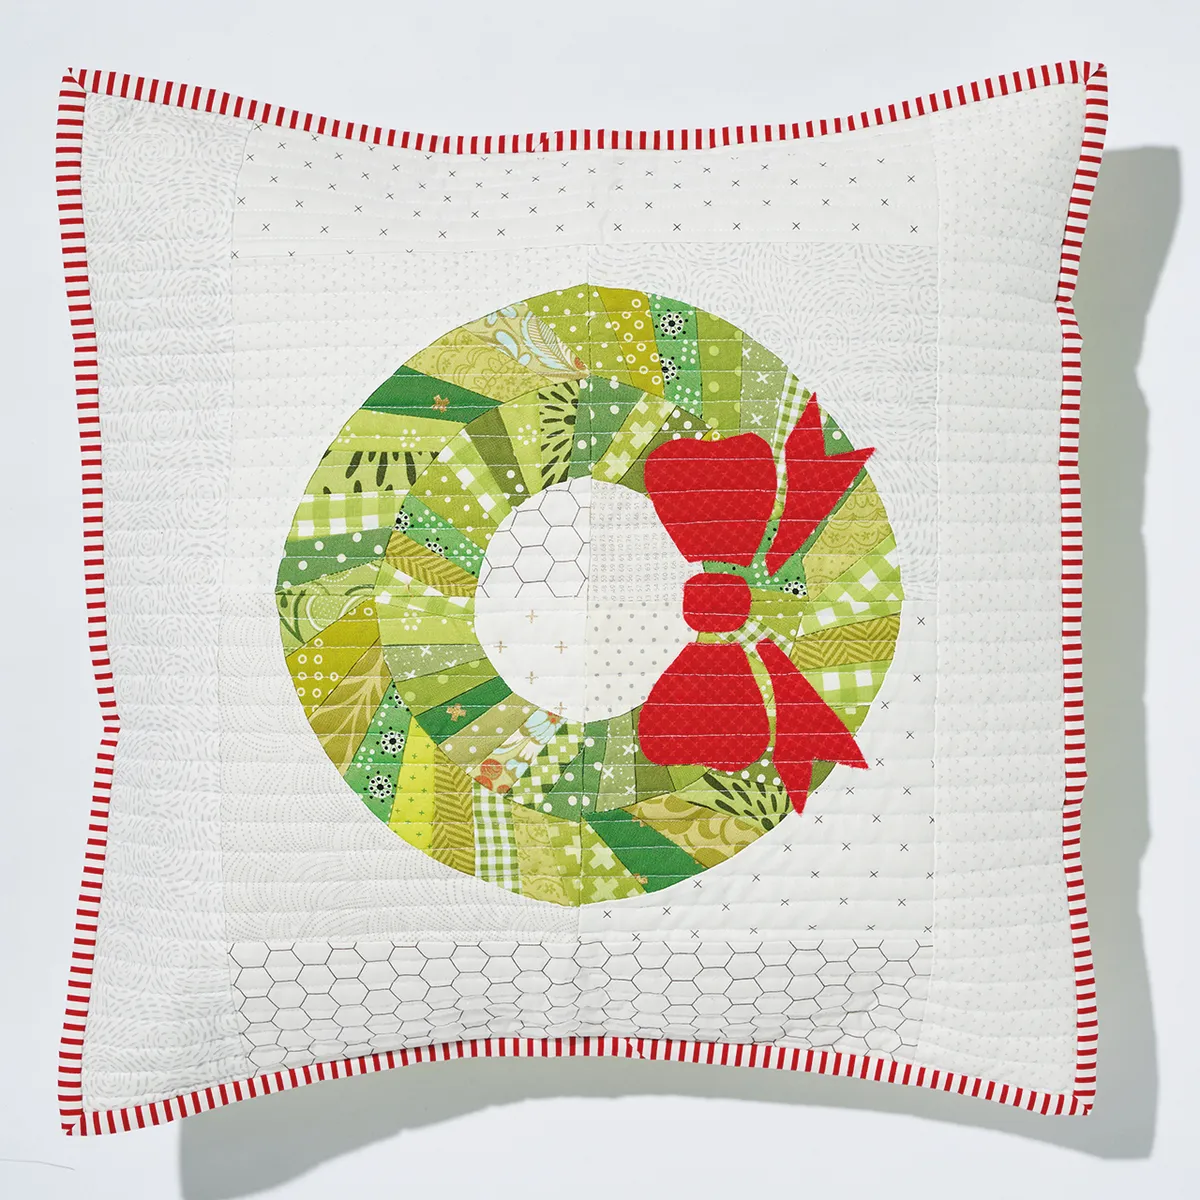 How to make a Christmas patchwork wreath cushion